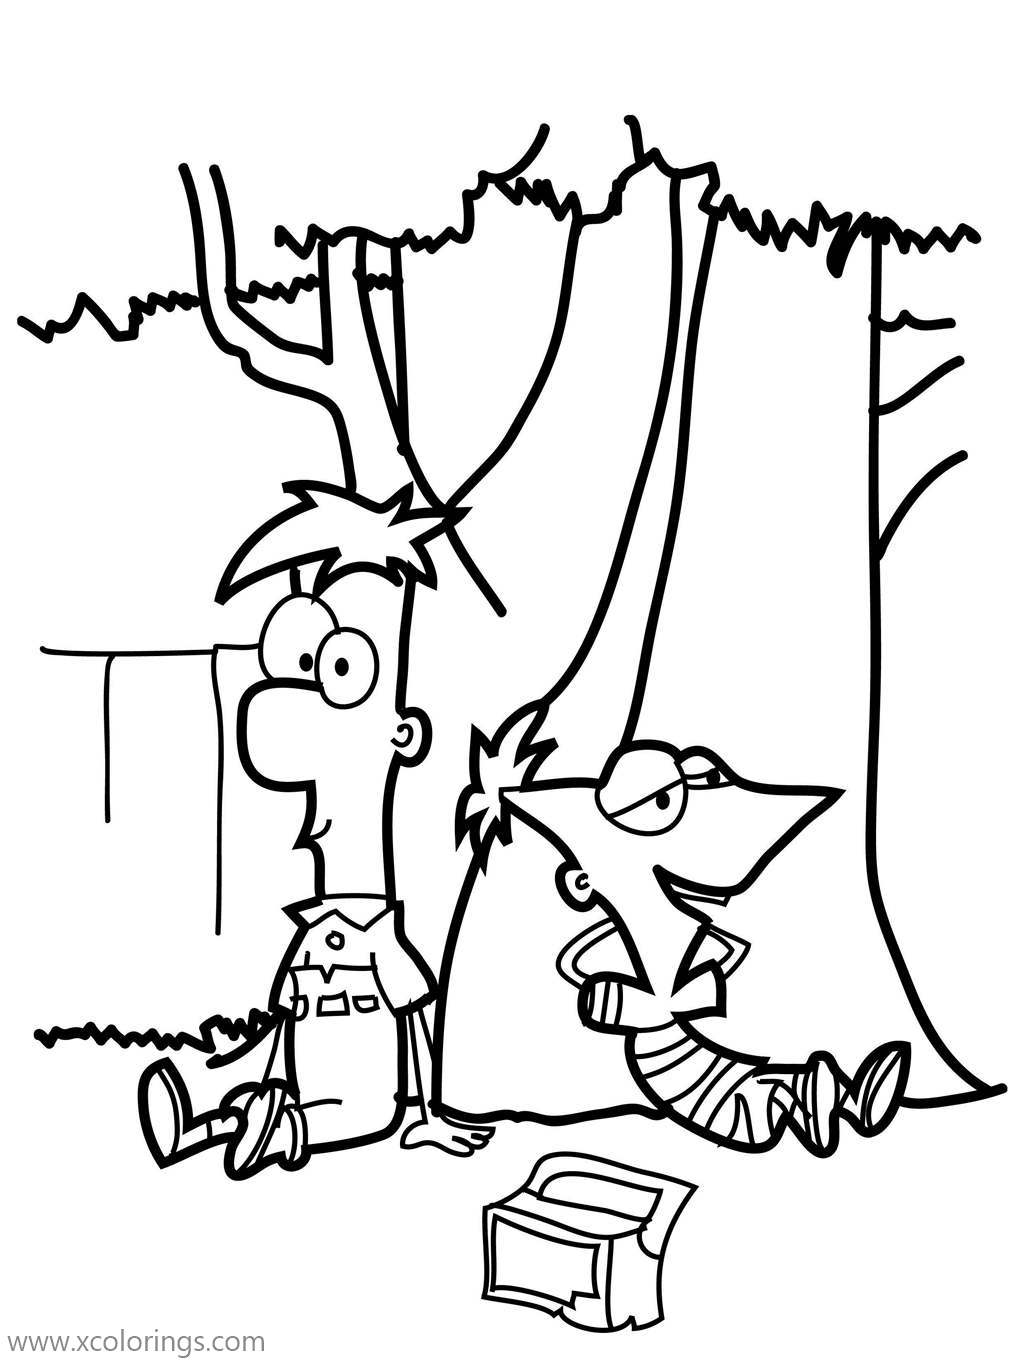 Free Phineas and Ferb Under the Tree Coloring Pages printable